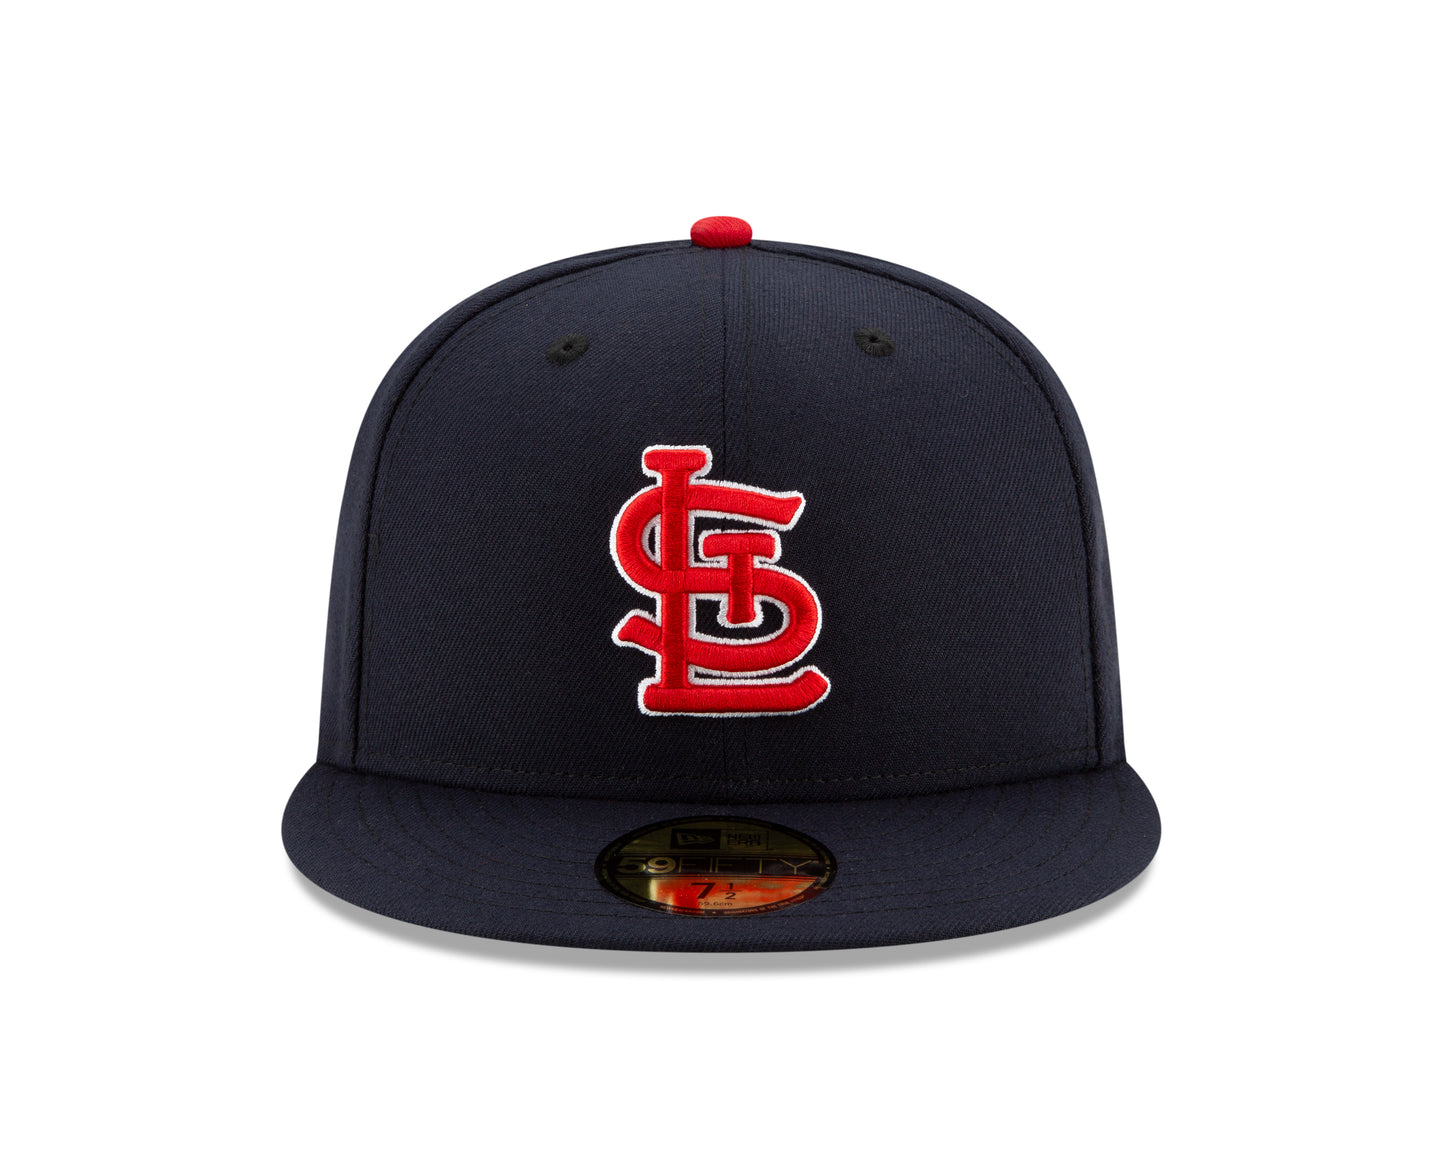 St. Louis Cardinals MLB Authentic Collections Performance Alt. 59FIFTY Hat - Navy